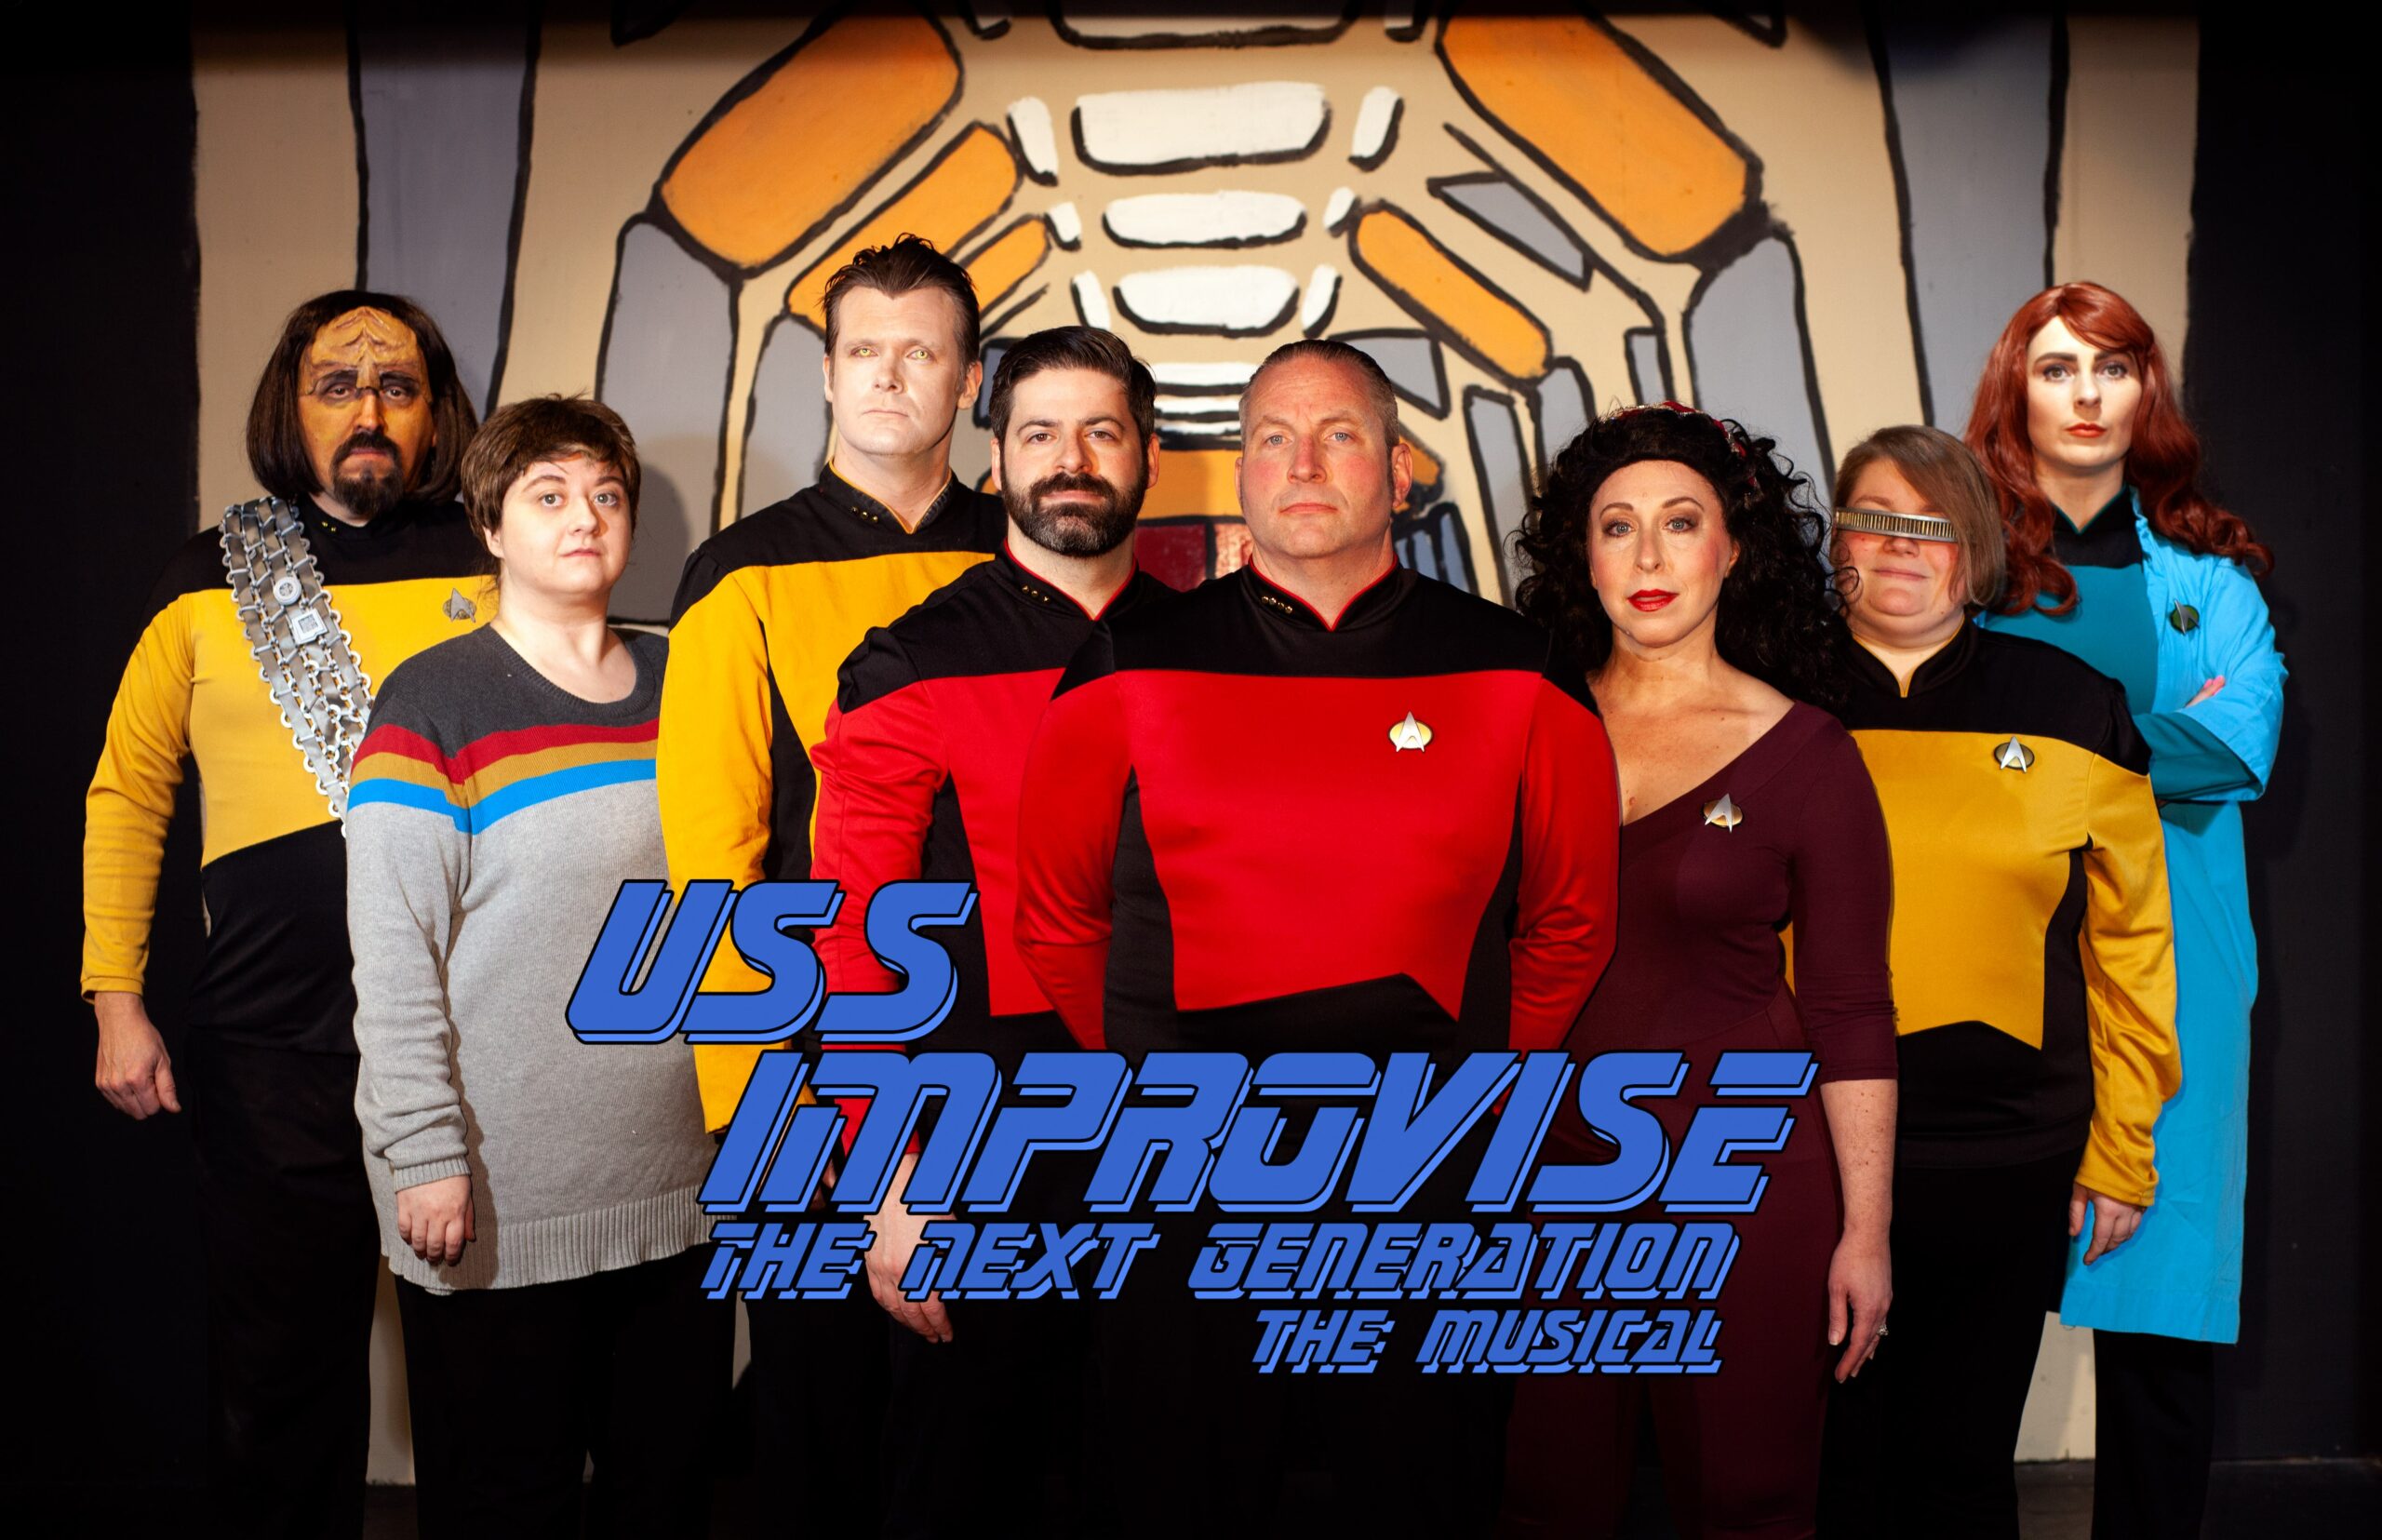 USS Improvise: The Next Generation: The Musical